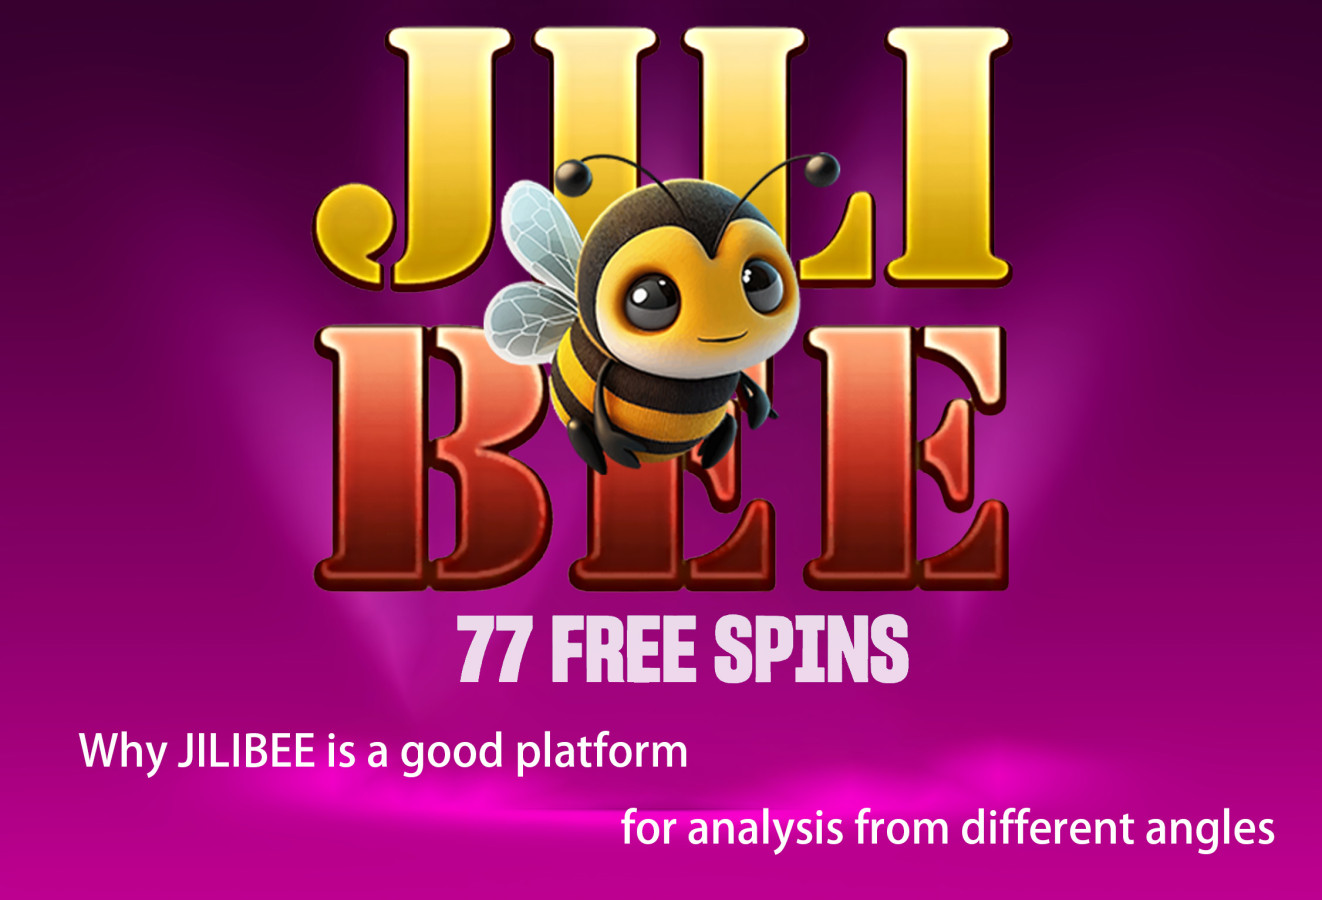 Why jilibee is a good platform for analysis from different angles